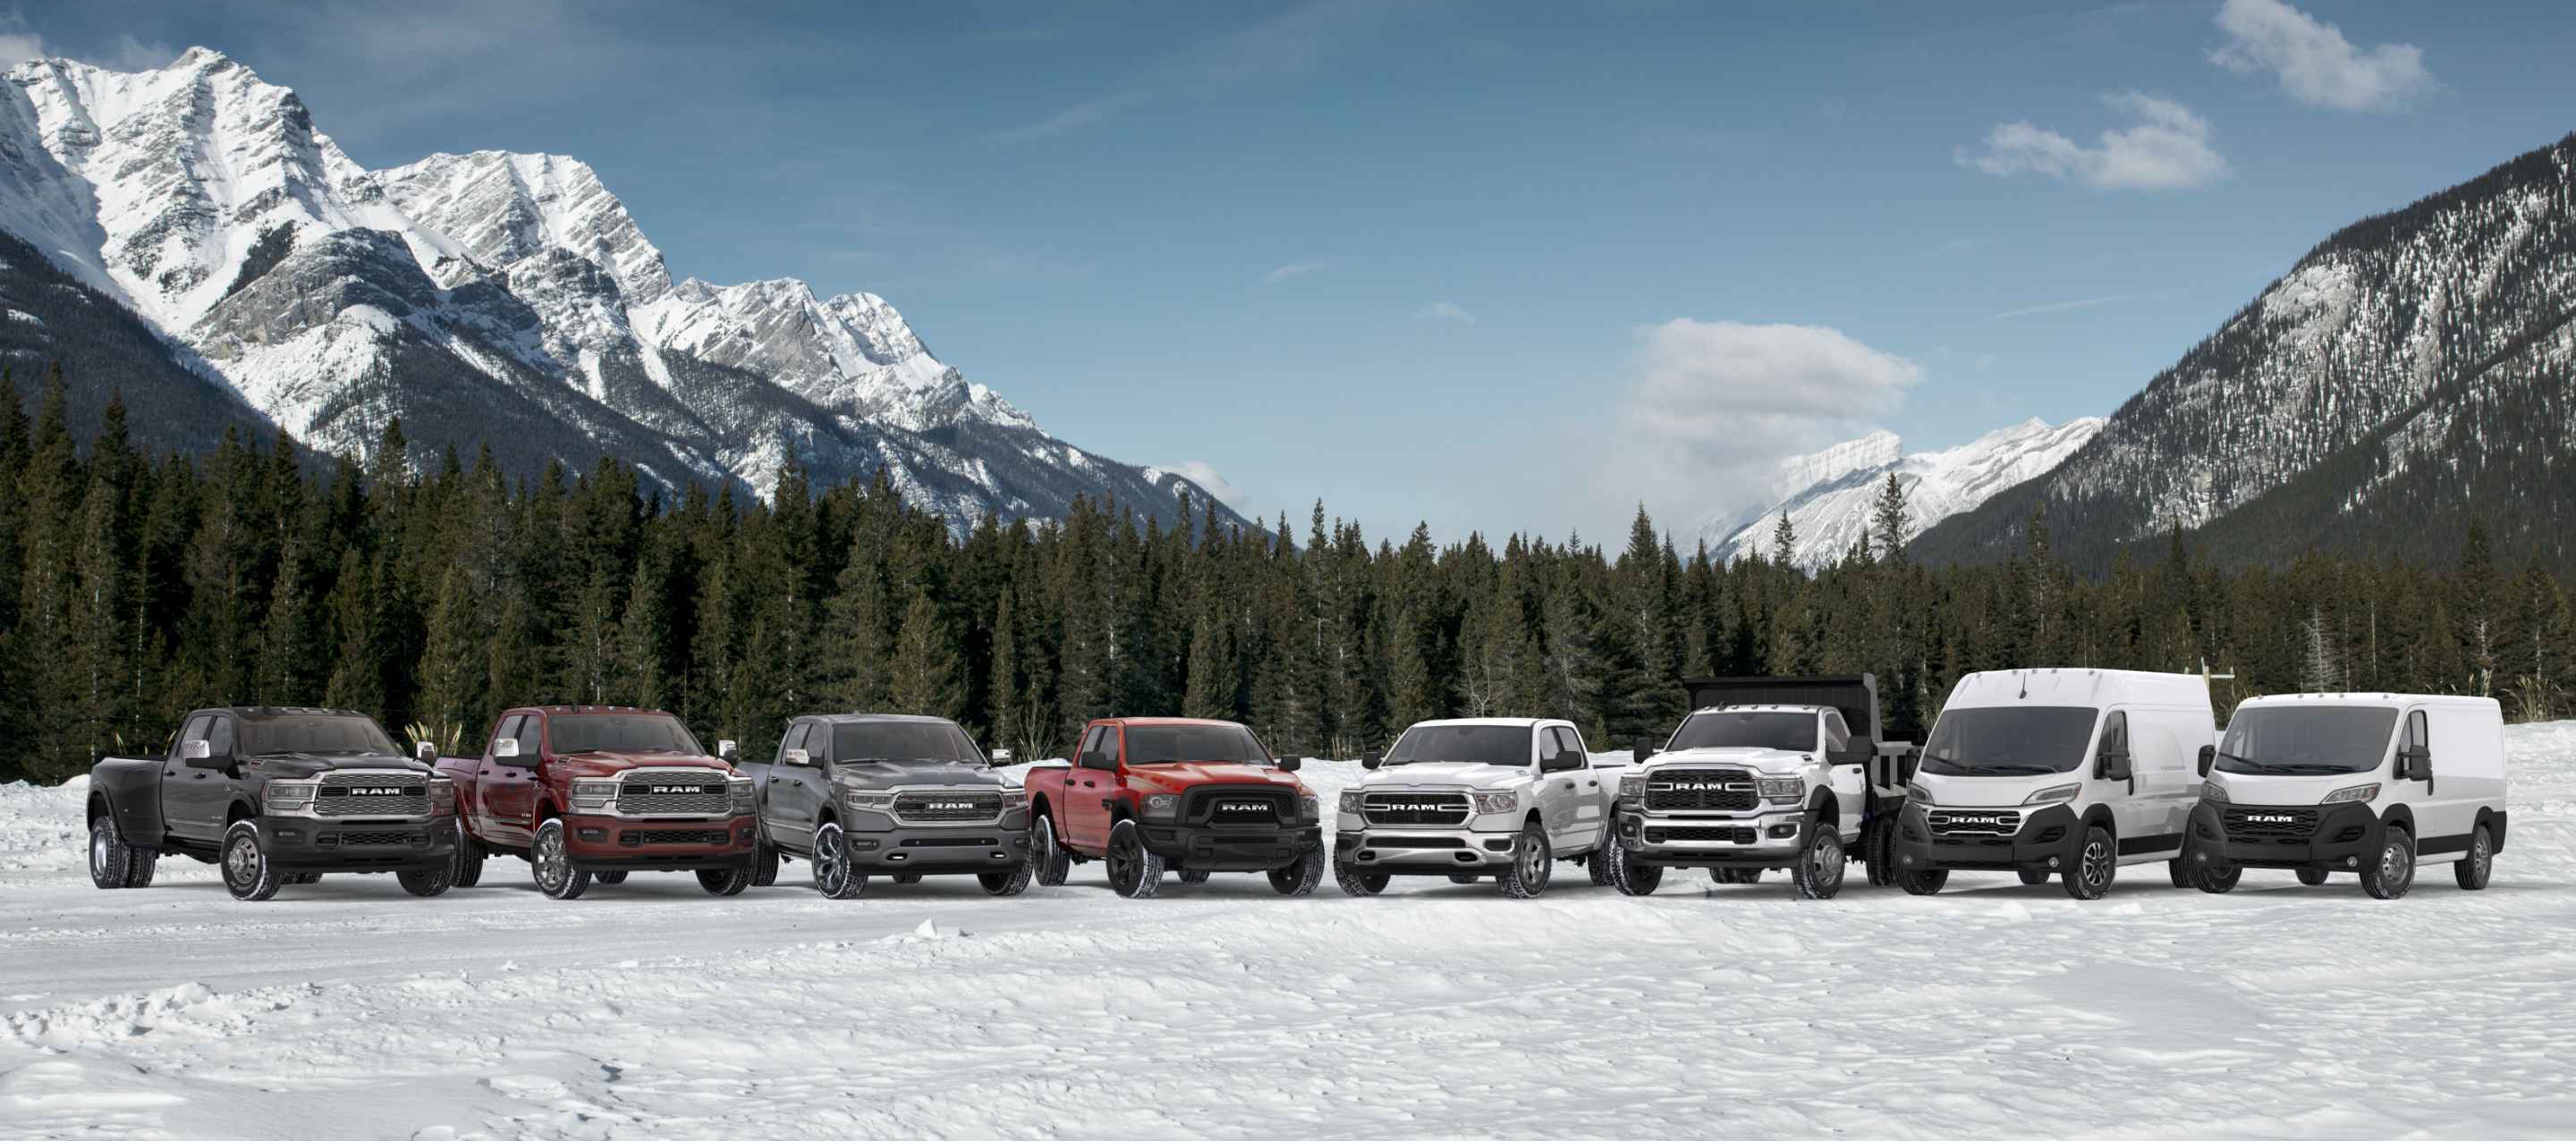 The 2024 lineup of six Ram trucks and two Ram vans parked in a semicircle on a snow-covered clearing, with mountains and evergreen trees in the background. From left to right: Three Ram Limited 4x4 Crew Cabs – a 3500, 2500 and 1500 followed by a Ram 1500 Classic Warlock 4x4 Quad Cab, a Ram 1500 Tradesman 4x4 Crew Cab, a Ram 5500 Tradesman 4x2 Chassis Cab with Dump Body, a Ram ProMaster Cargo Van High Roof and a Ram ProMaster Cargo Van Standard Roof. Ram Wrap Up the Year Sales Event.